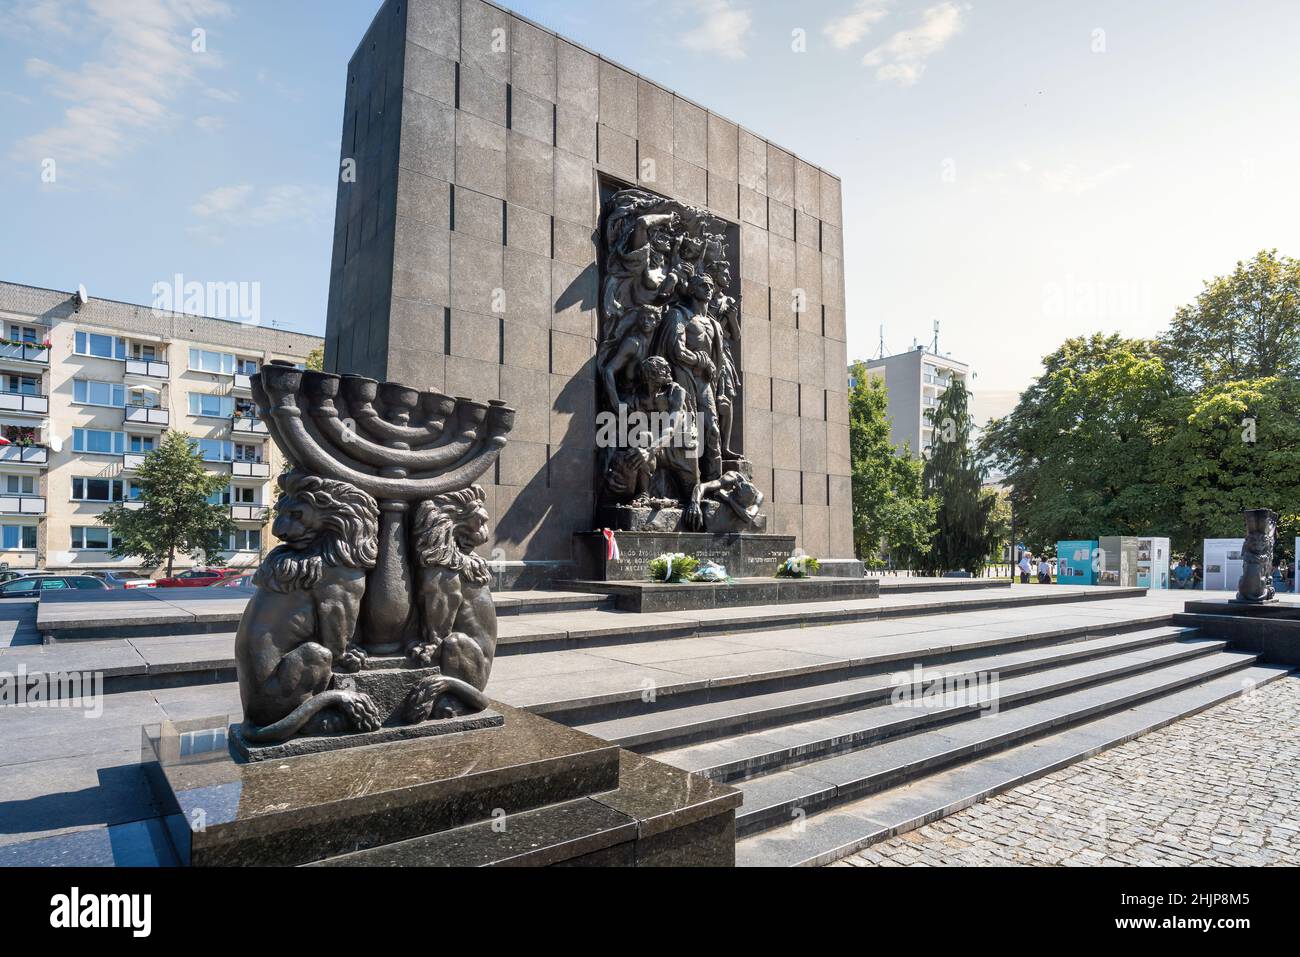 Monument to the Ghetto Heroes sculpted by Nathan Rapoport and unveiled in 1948 - Warsaw, Poland Stock Photo